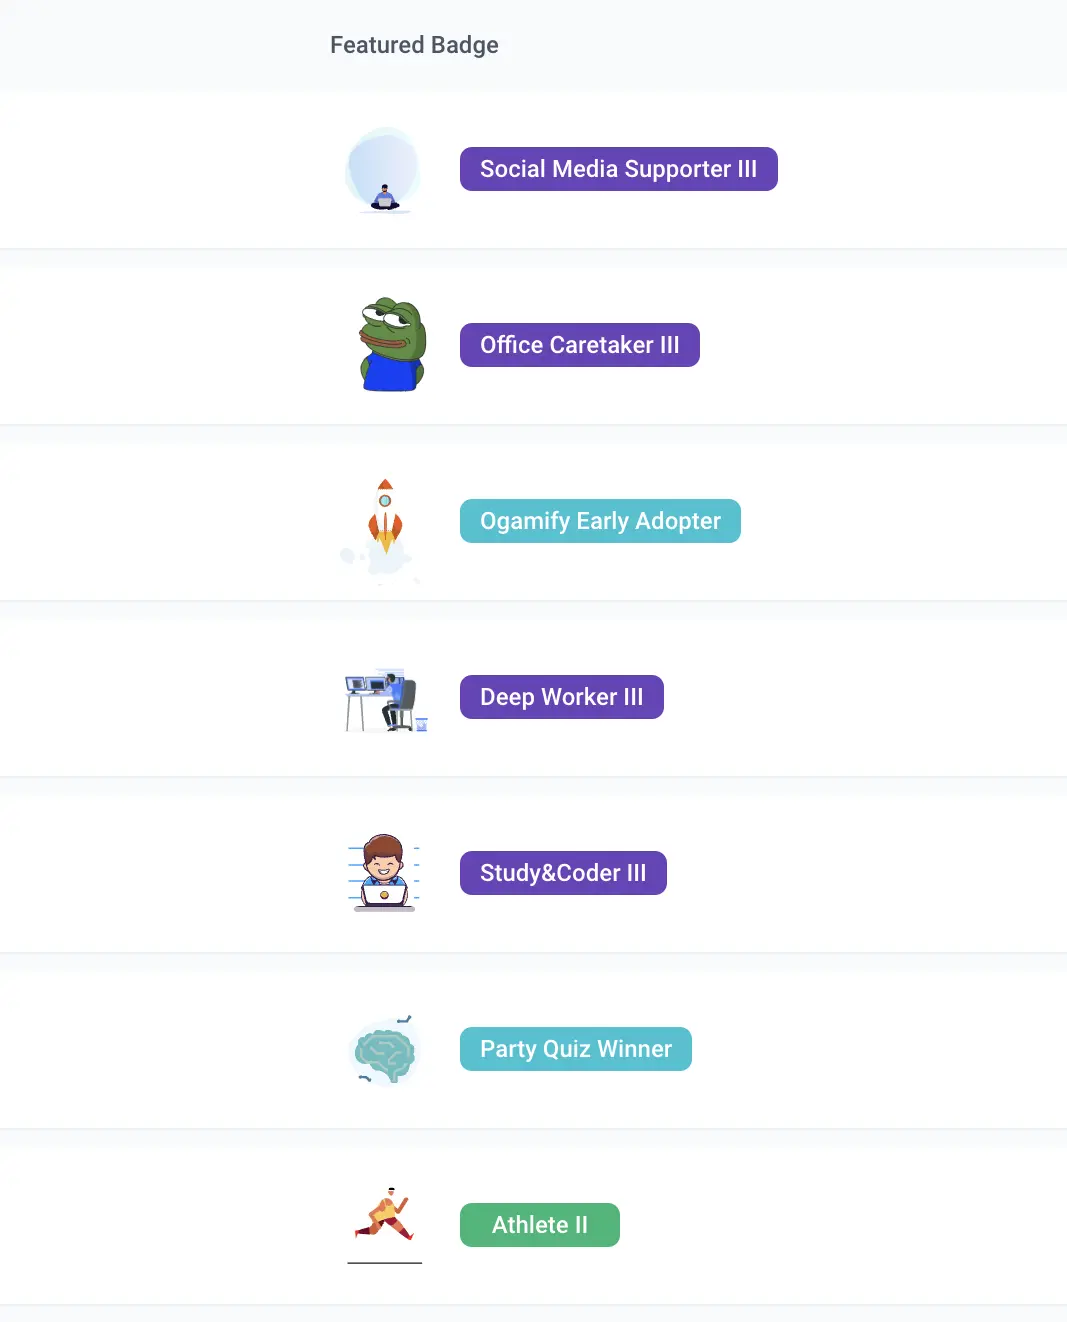 Ogamify badges examples